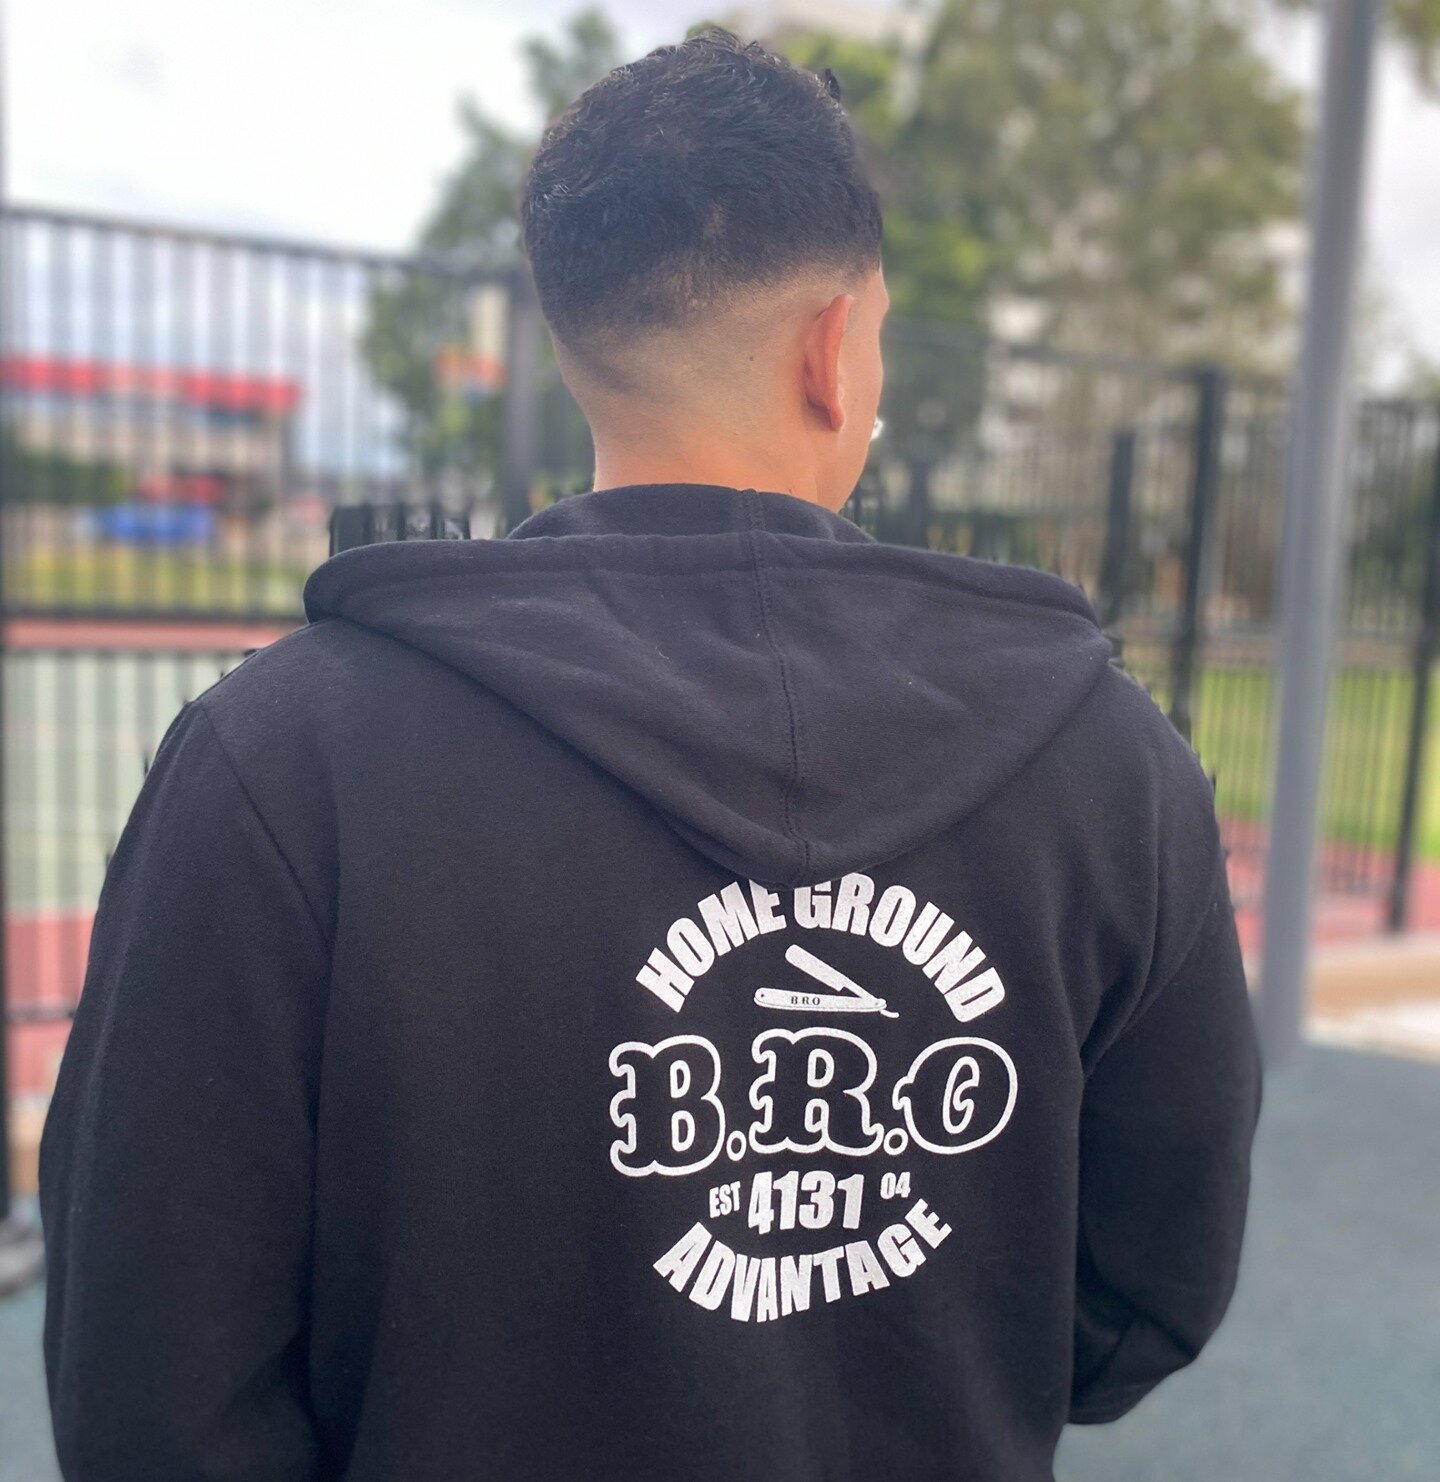 Now with the cold weather and the change of weather it is time to wrap up a bit warmer, we have the solution. We have a collection of sweatshirts to keep you warm this winter 🥶. What are you waiting for? 🏃🏃

Link in the Bio📲
.
.
.
#barber #barber